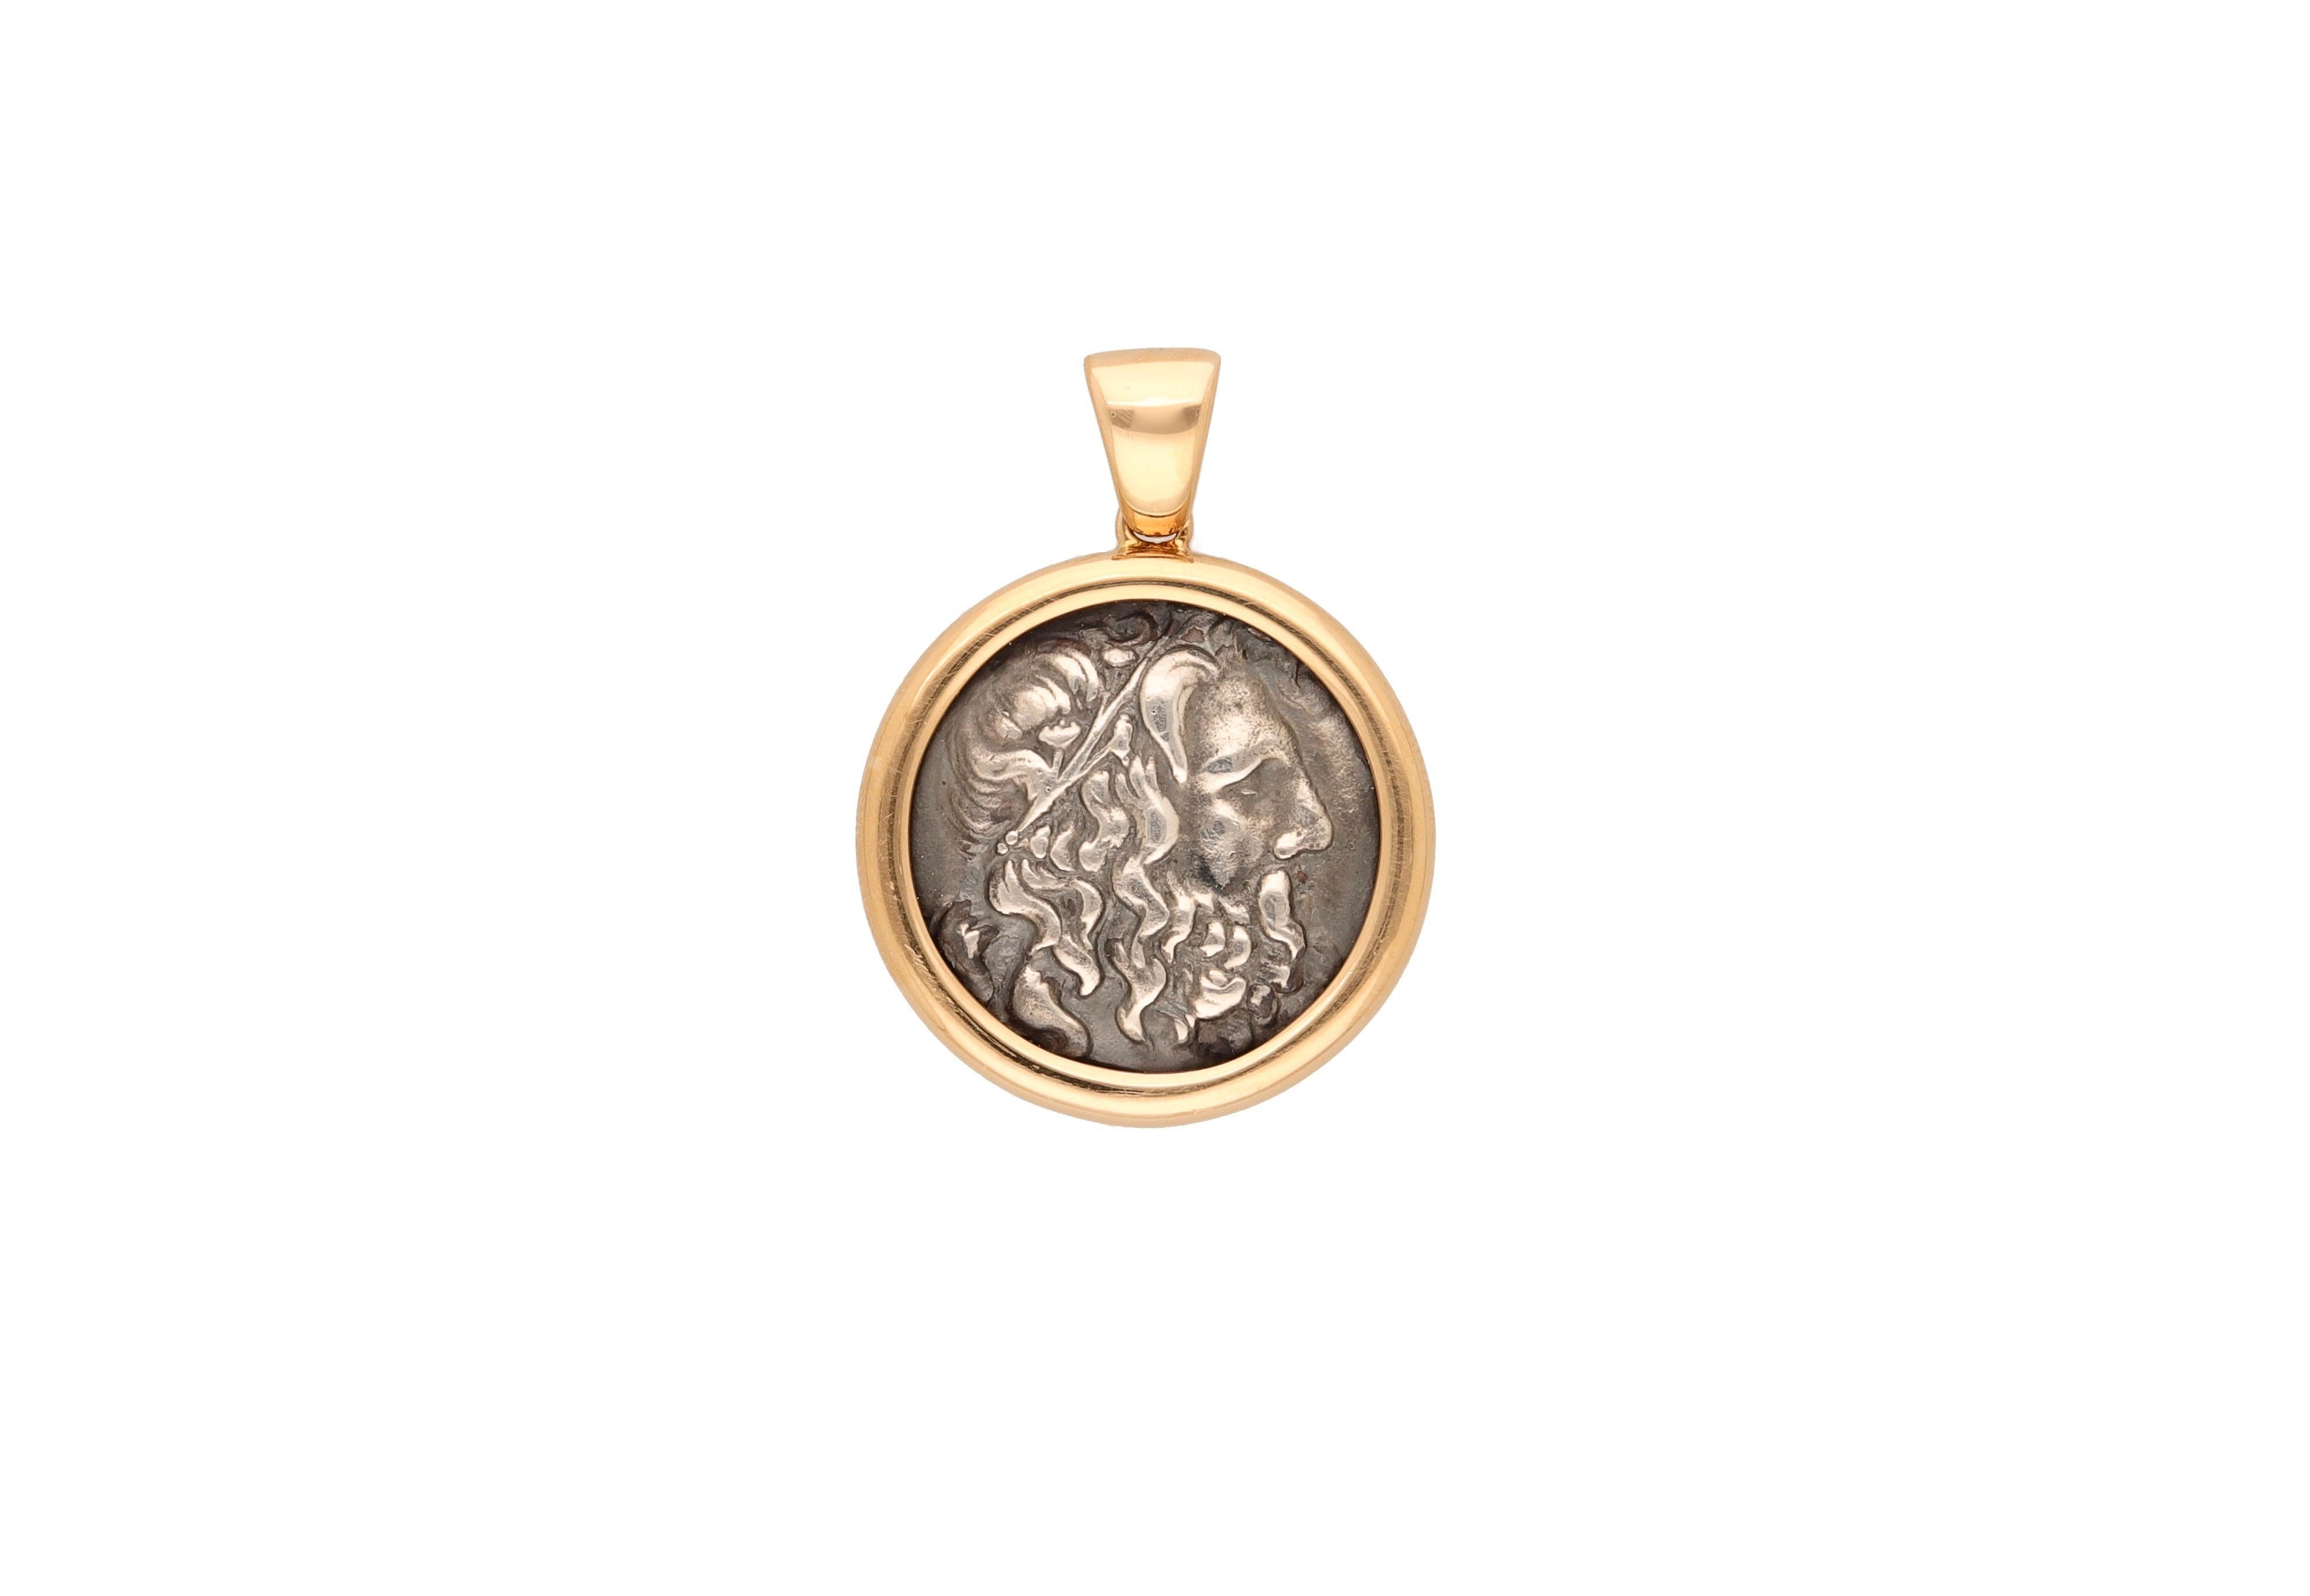 18 kt. yellow gold pendant with an ancient coin signed by Bulgari.
Diameter 3.15 cm. 
Coin: Tetradrame Antiochus IV, 215-164 A.C.
Comes with the original box.
1980 ca.
Weight gr. 27.50
